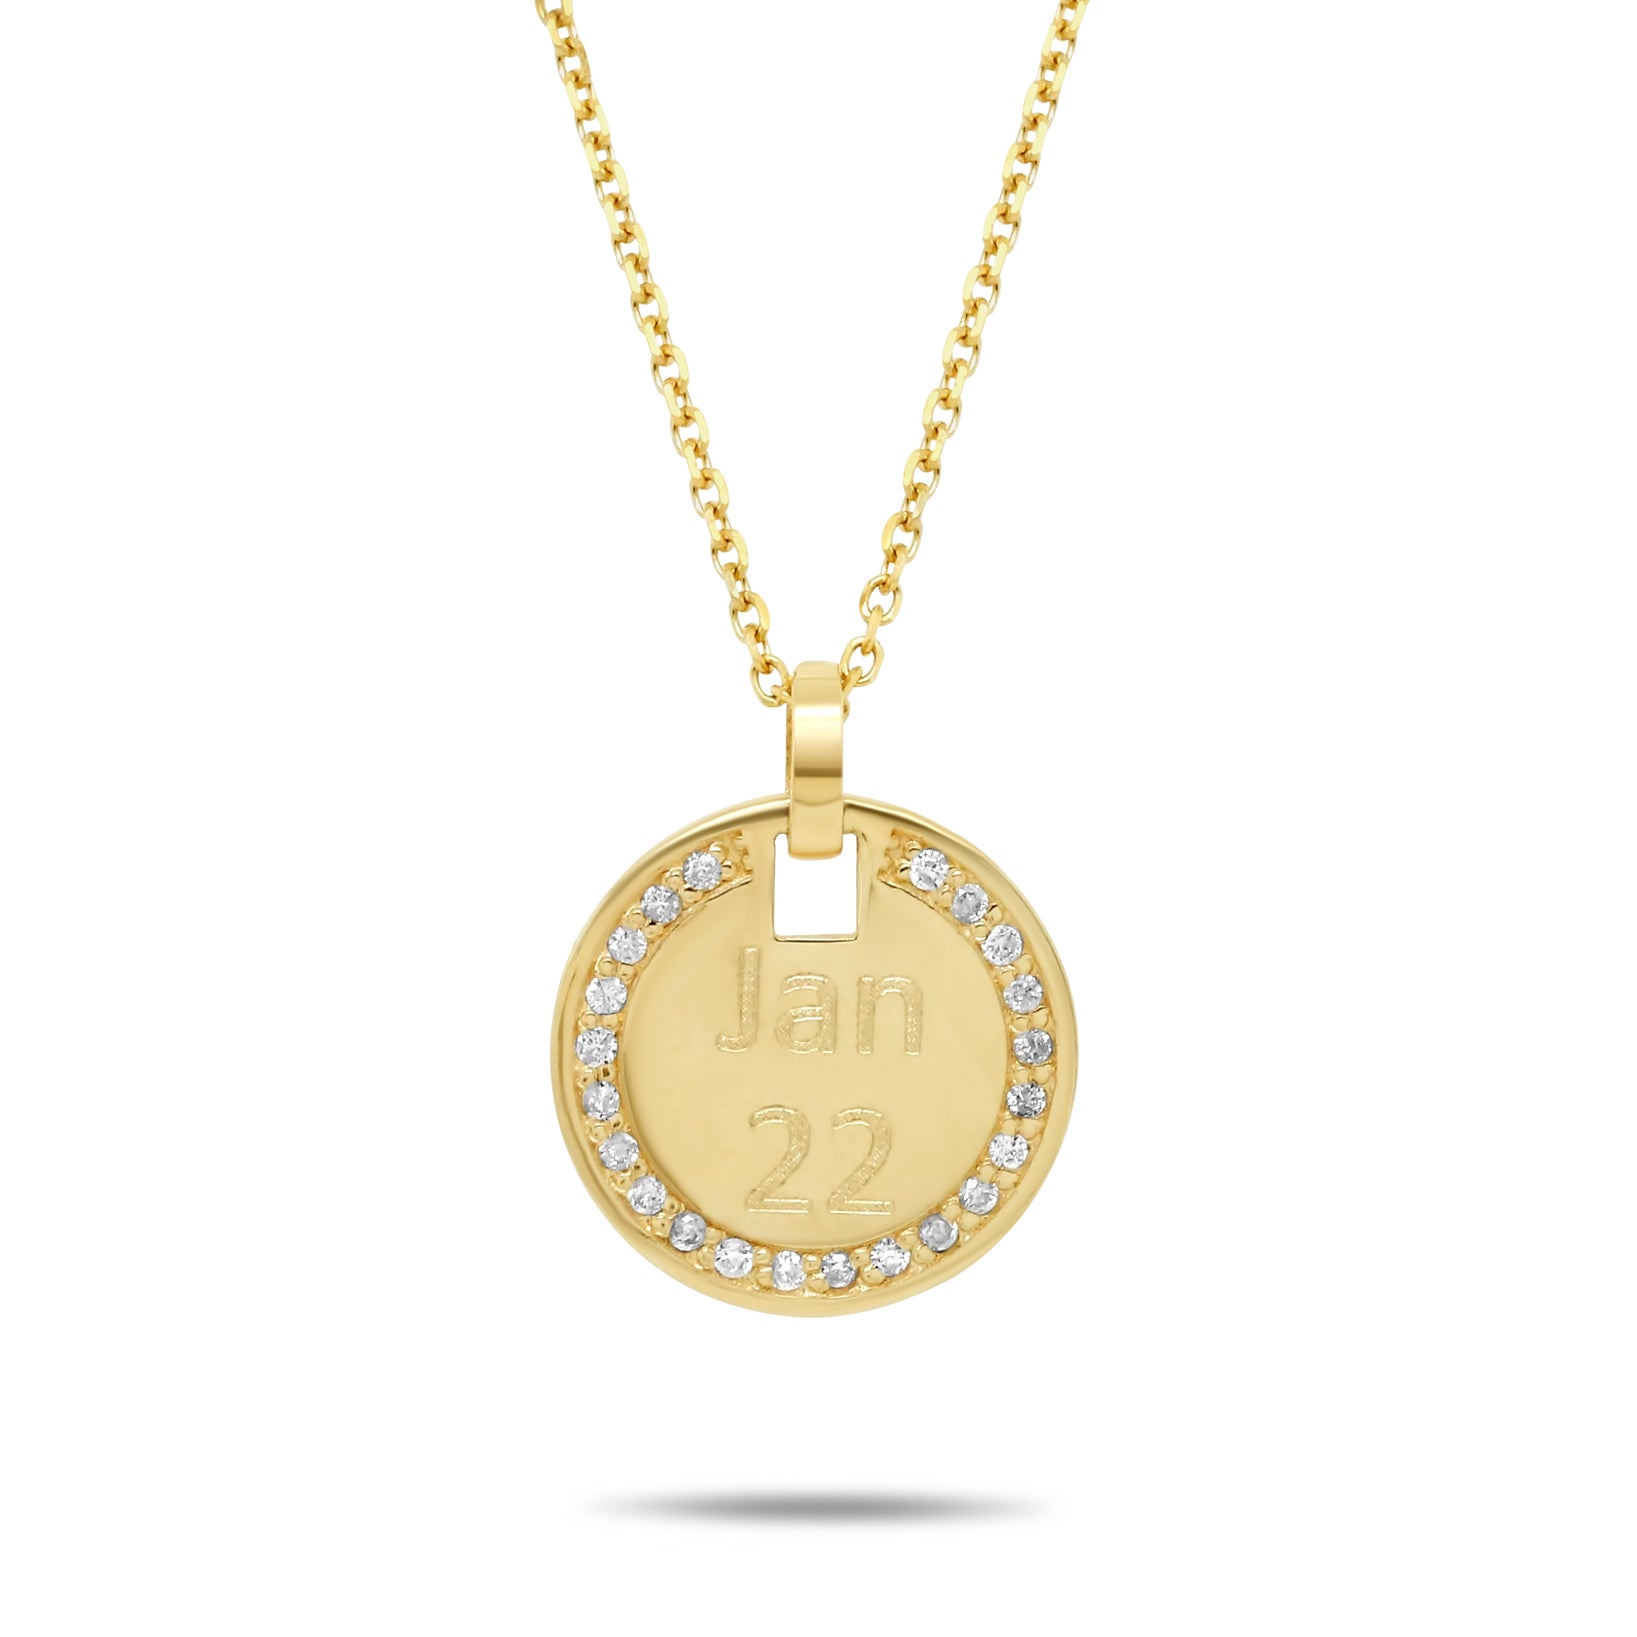 18 inch 14k yellow gold diamond pave pendant personalized necklace